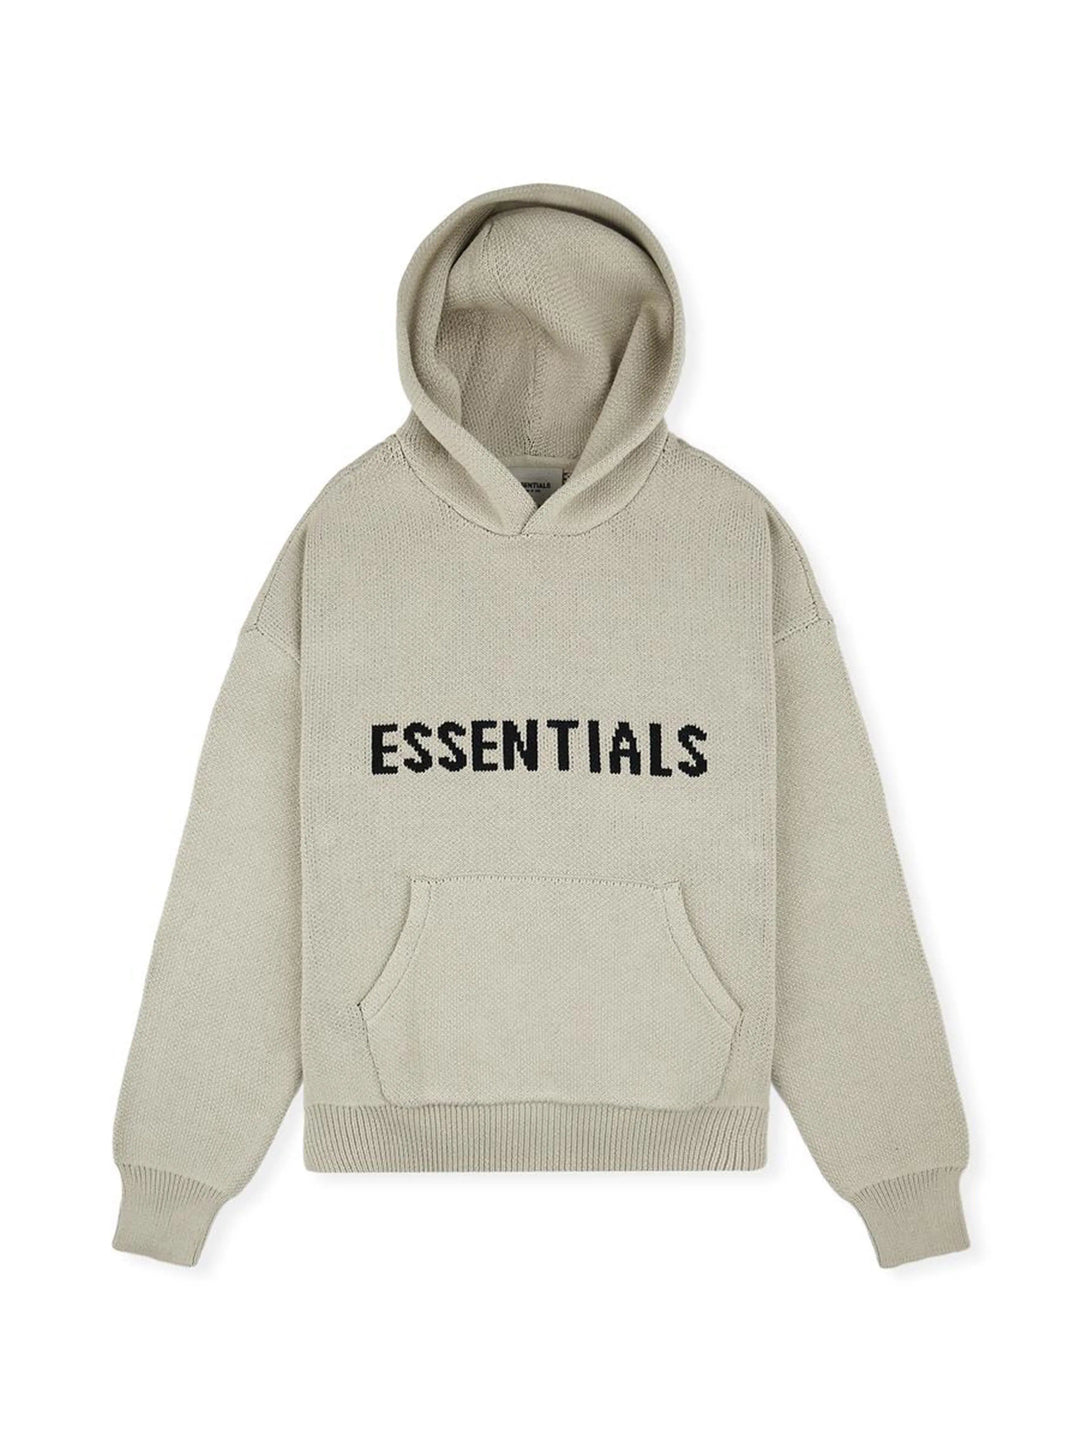 Fear Of God Essentials Pullover Knit Hoodie Olive/Khaki [FW20] Prior